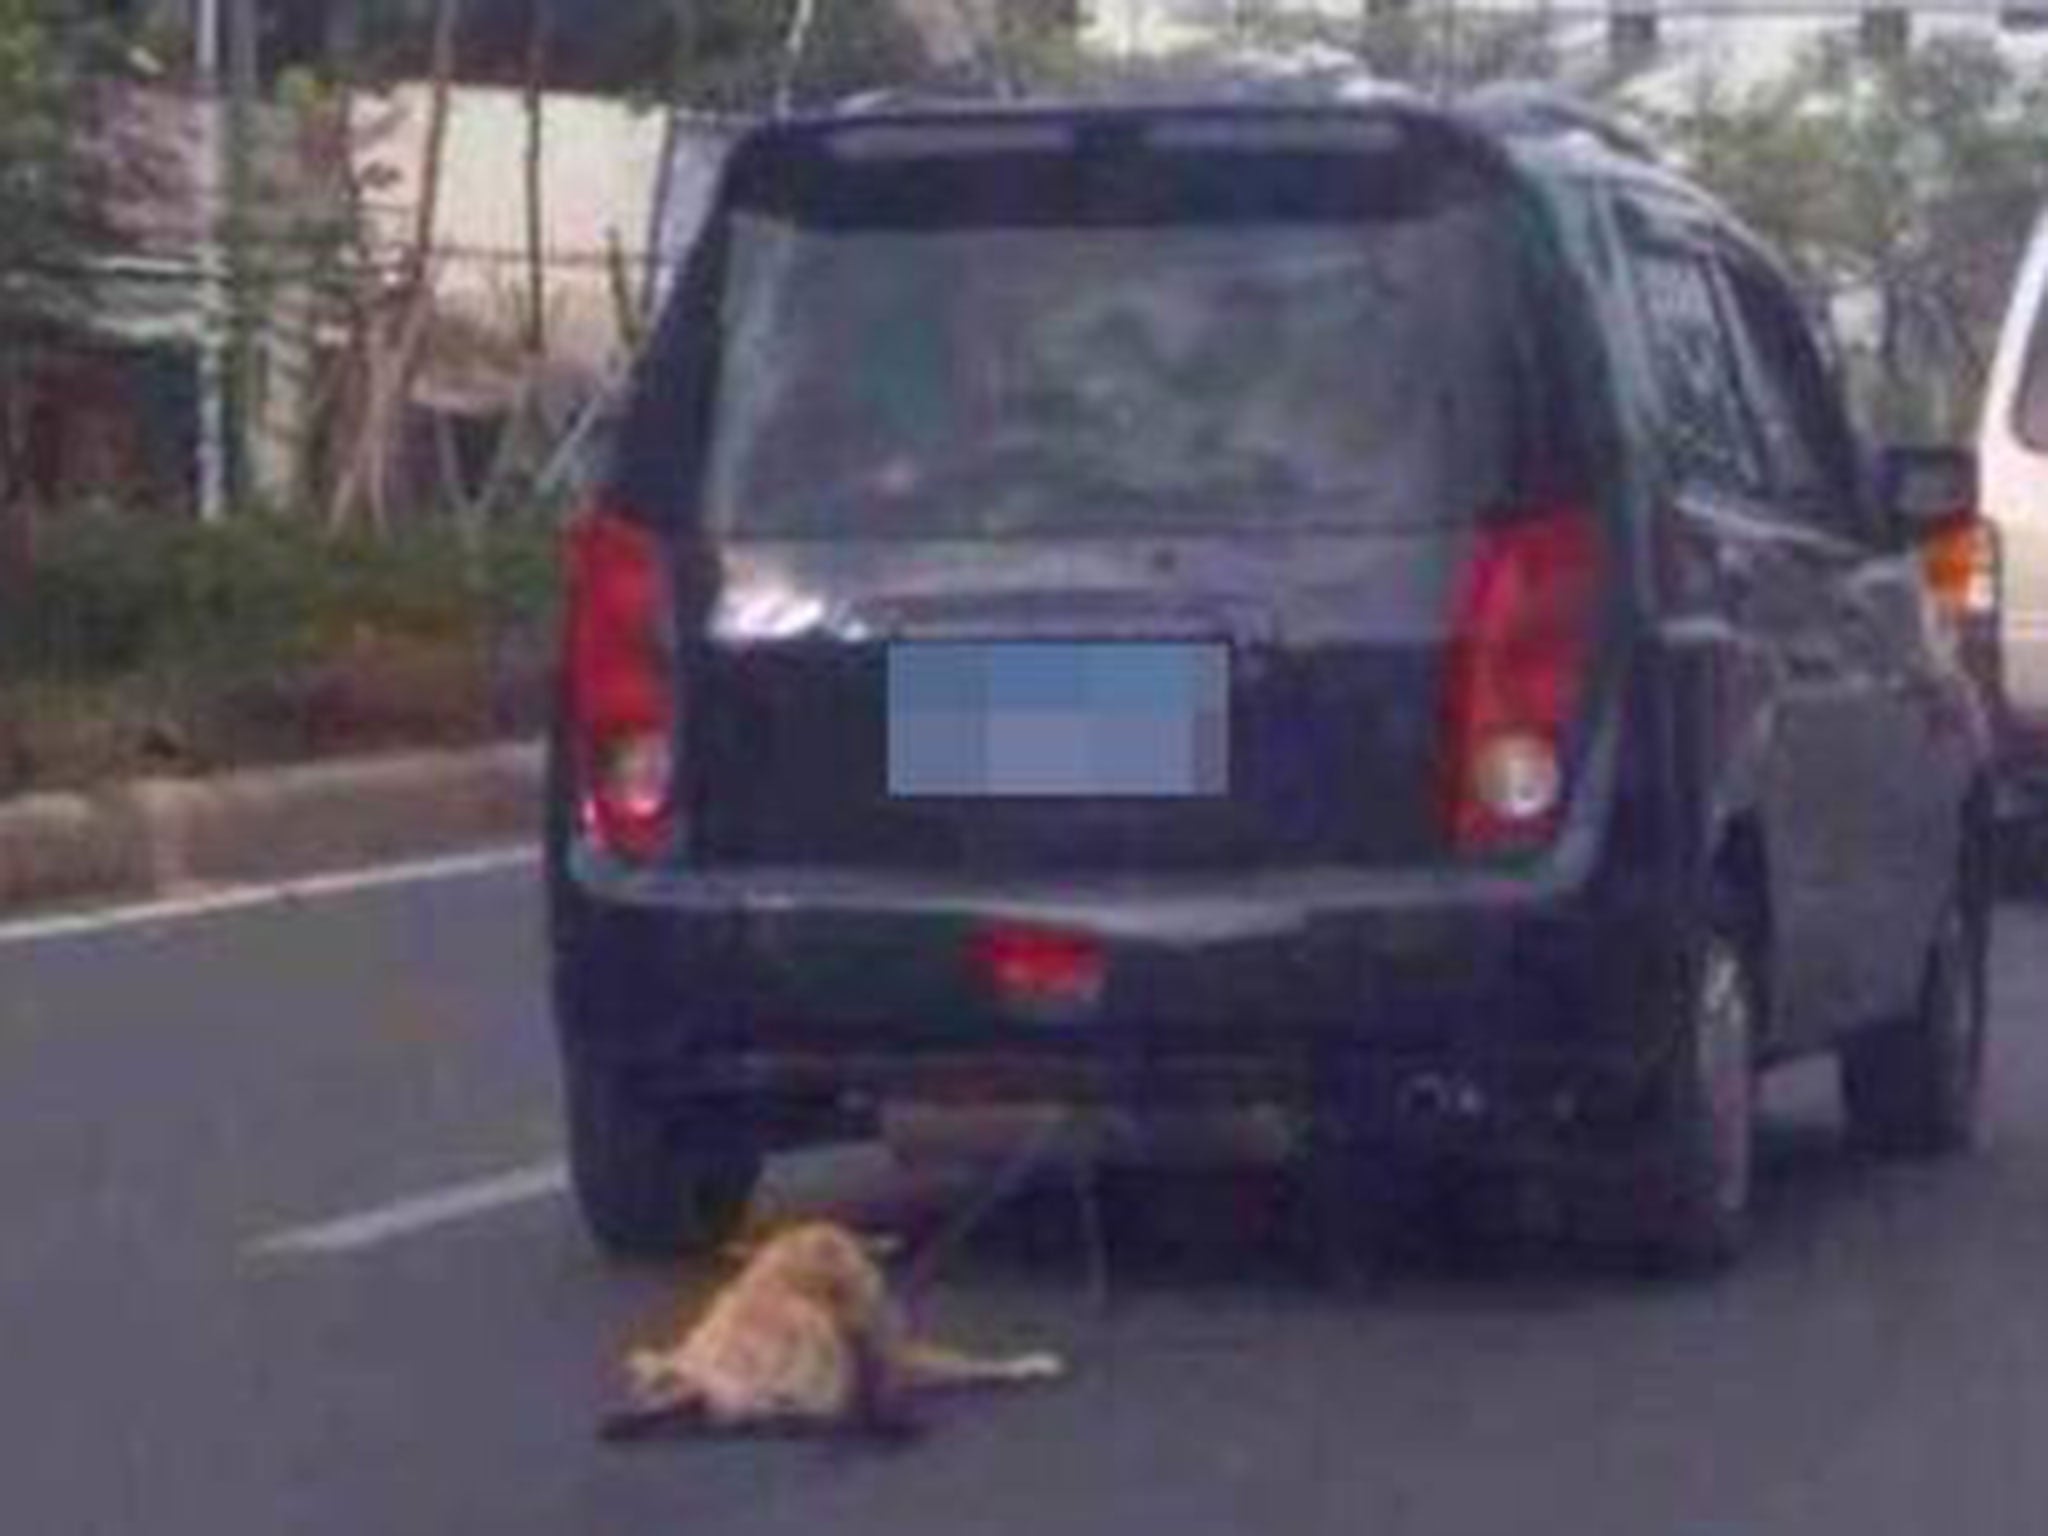 Images were uploaded onto Weibo of the dog being dragged by the car in Guangdong province